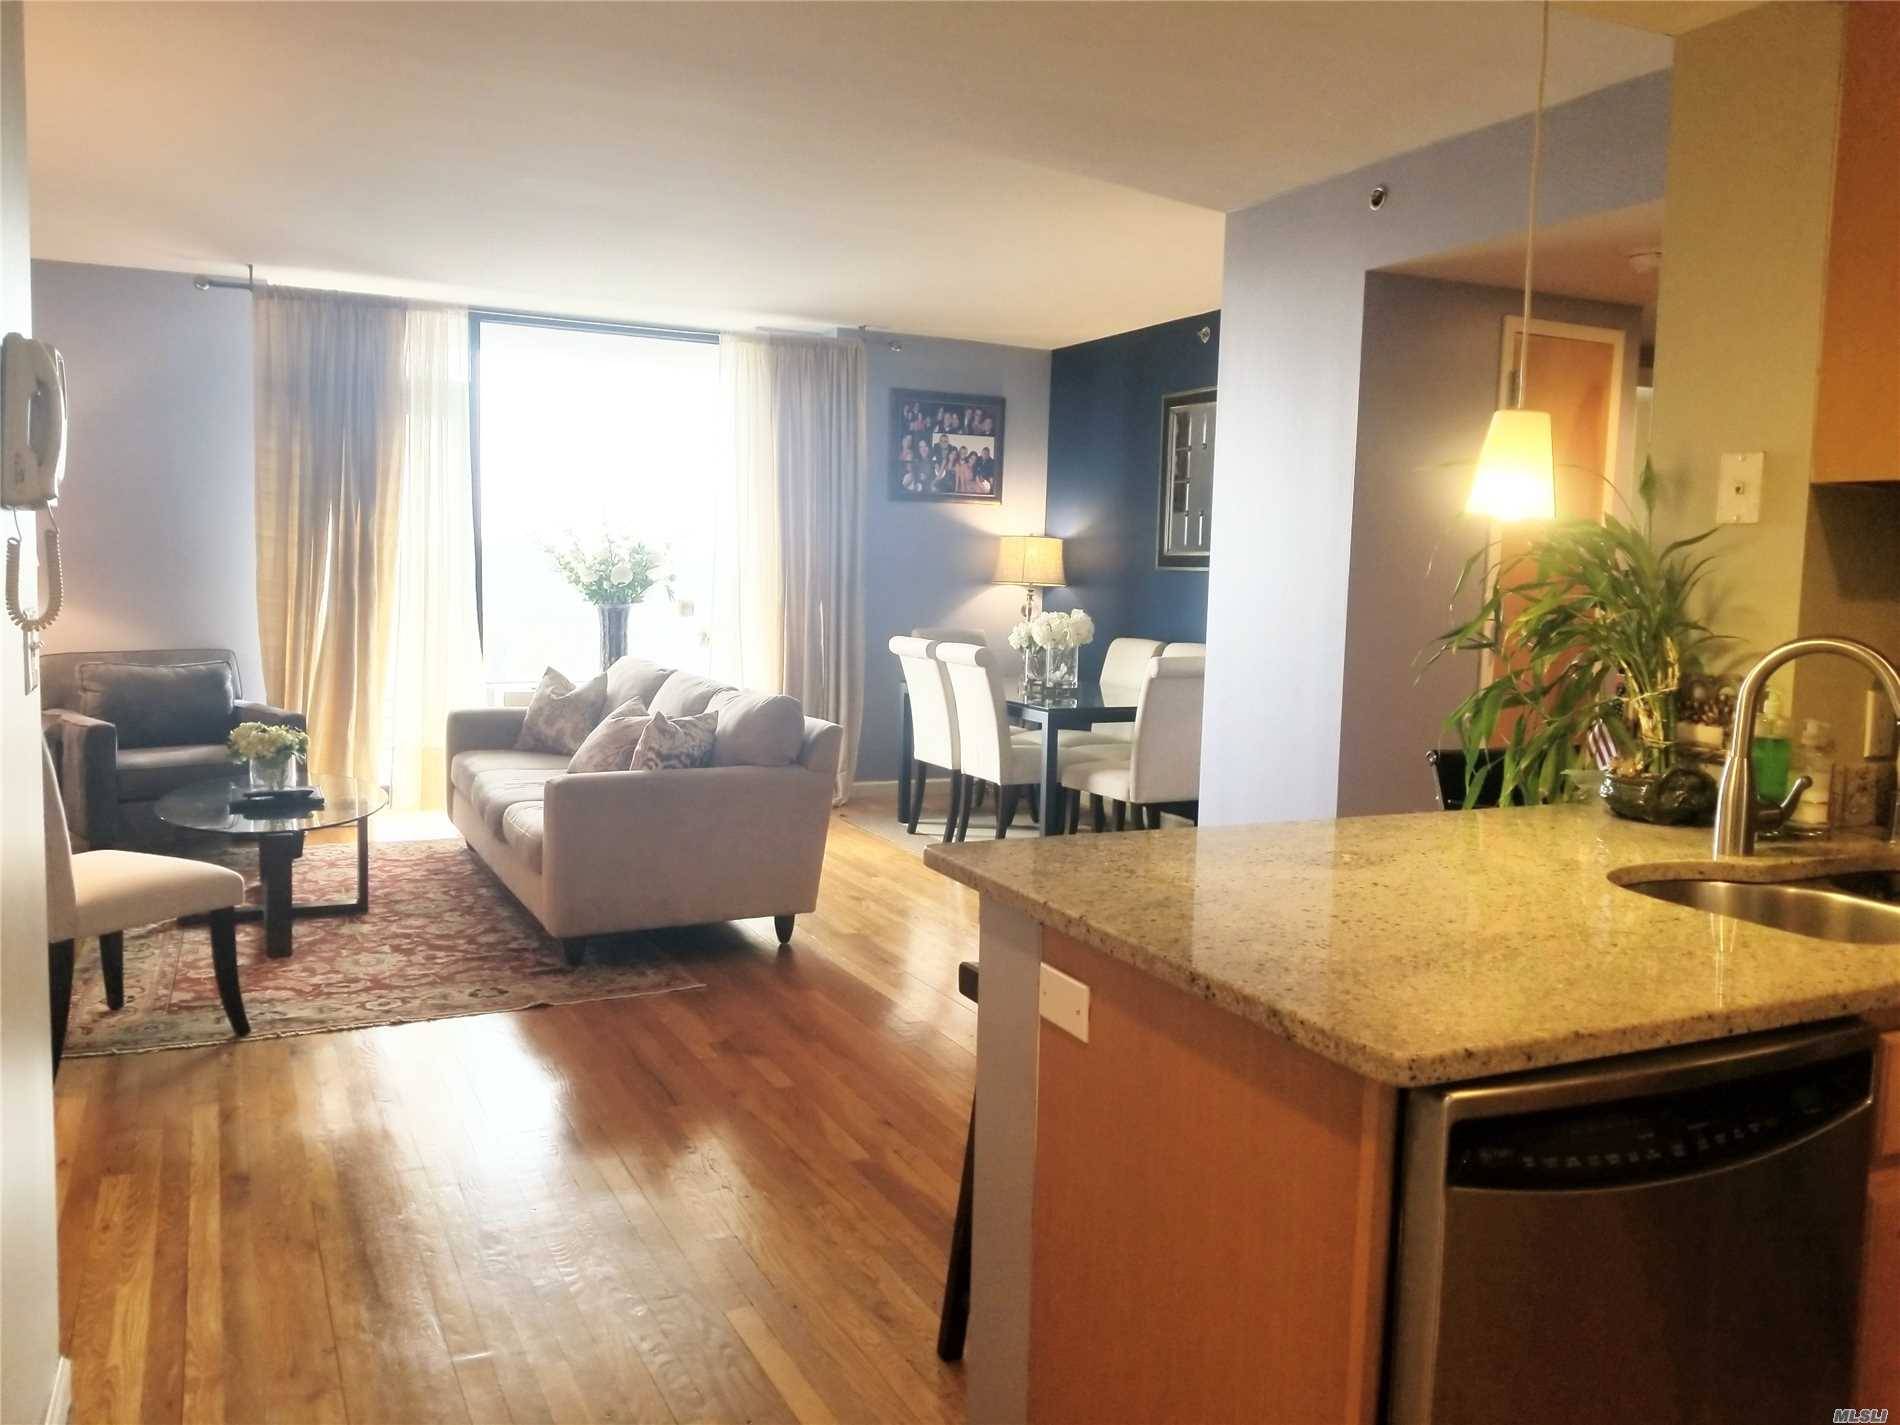 Indulge Yourself In This Beautiful 12 Floor Condo Whit Spectacular Views.